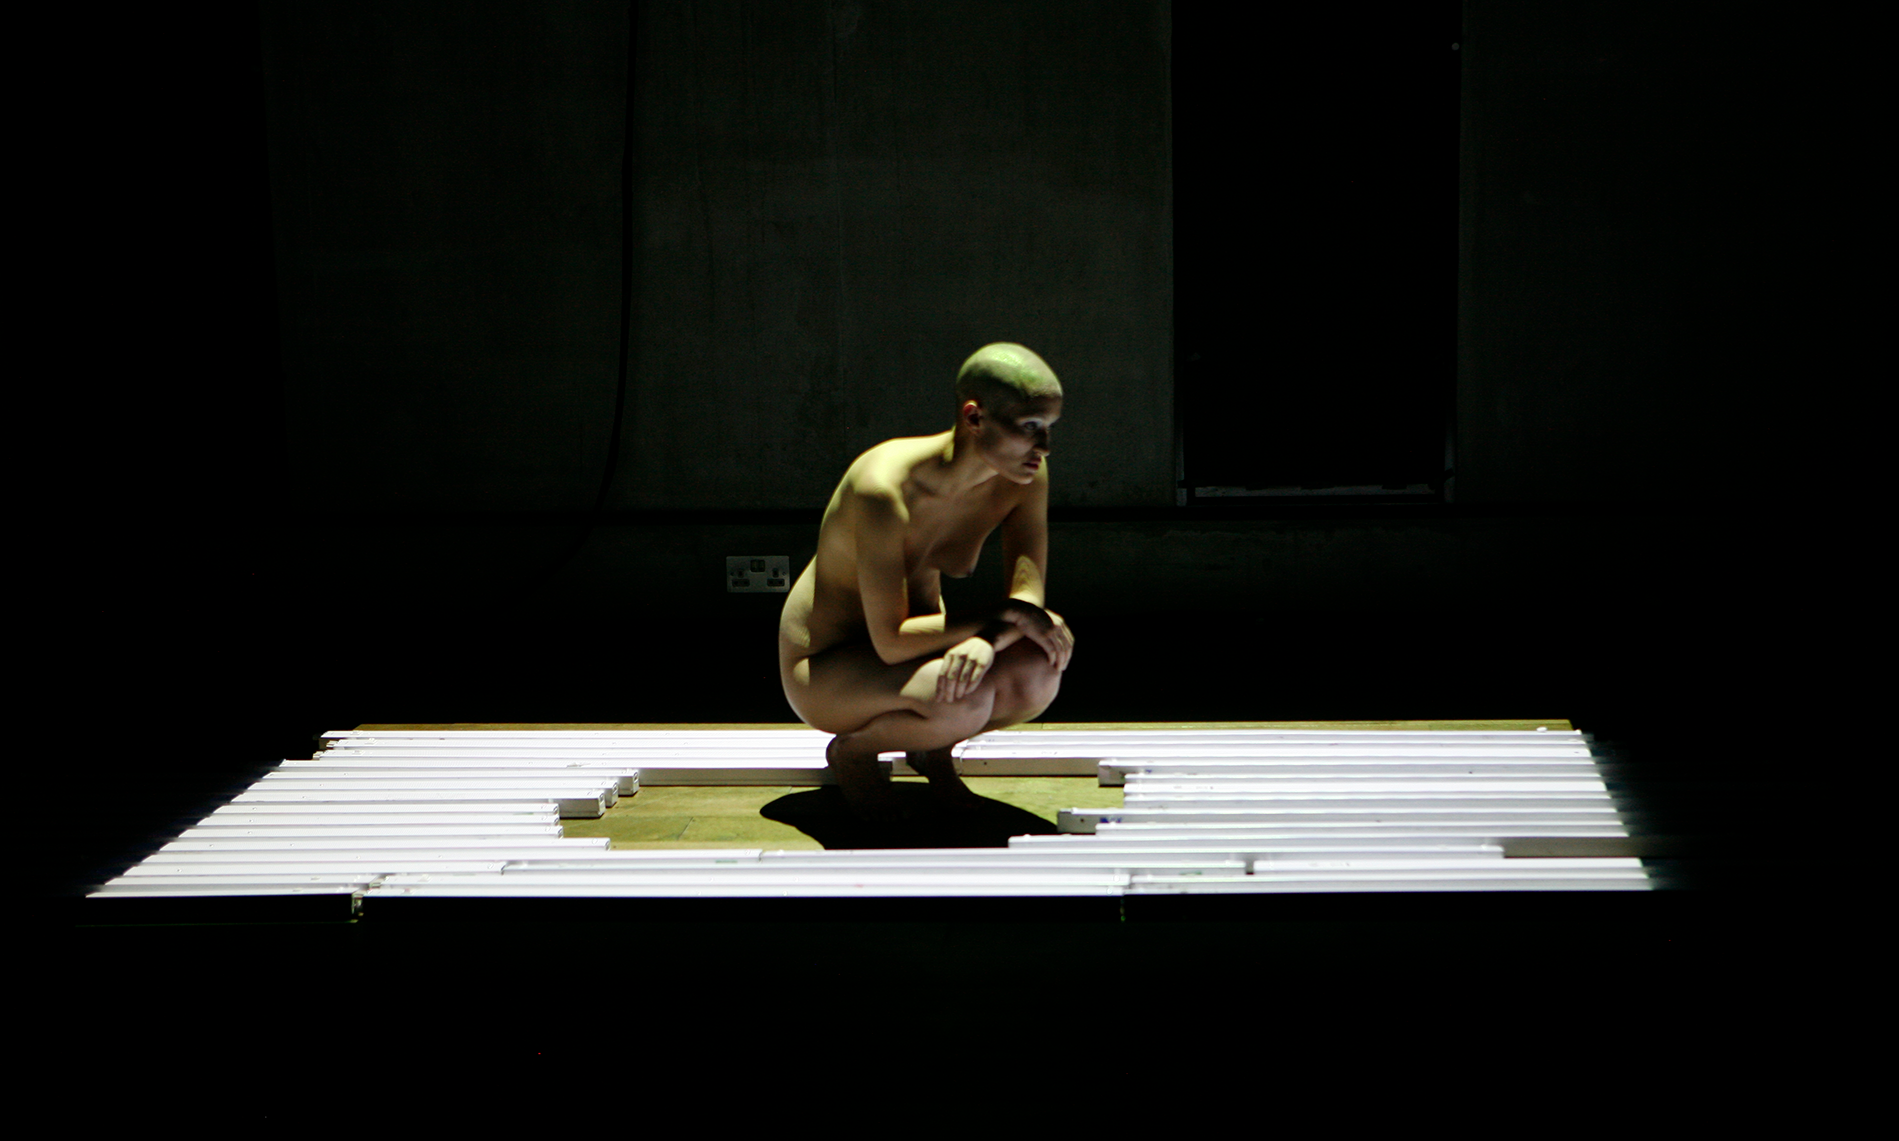 a nude person crouching on a brightly lit platform